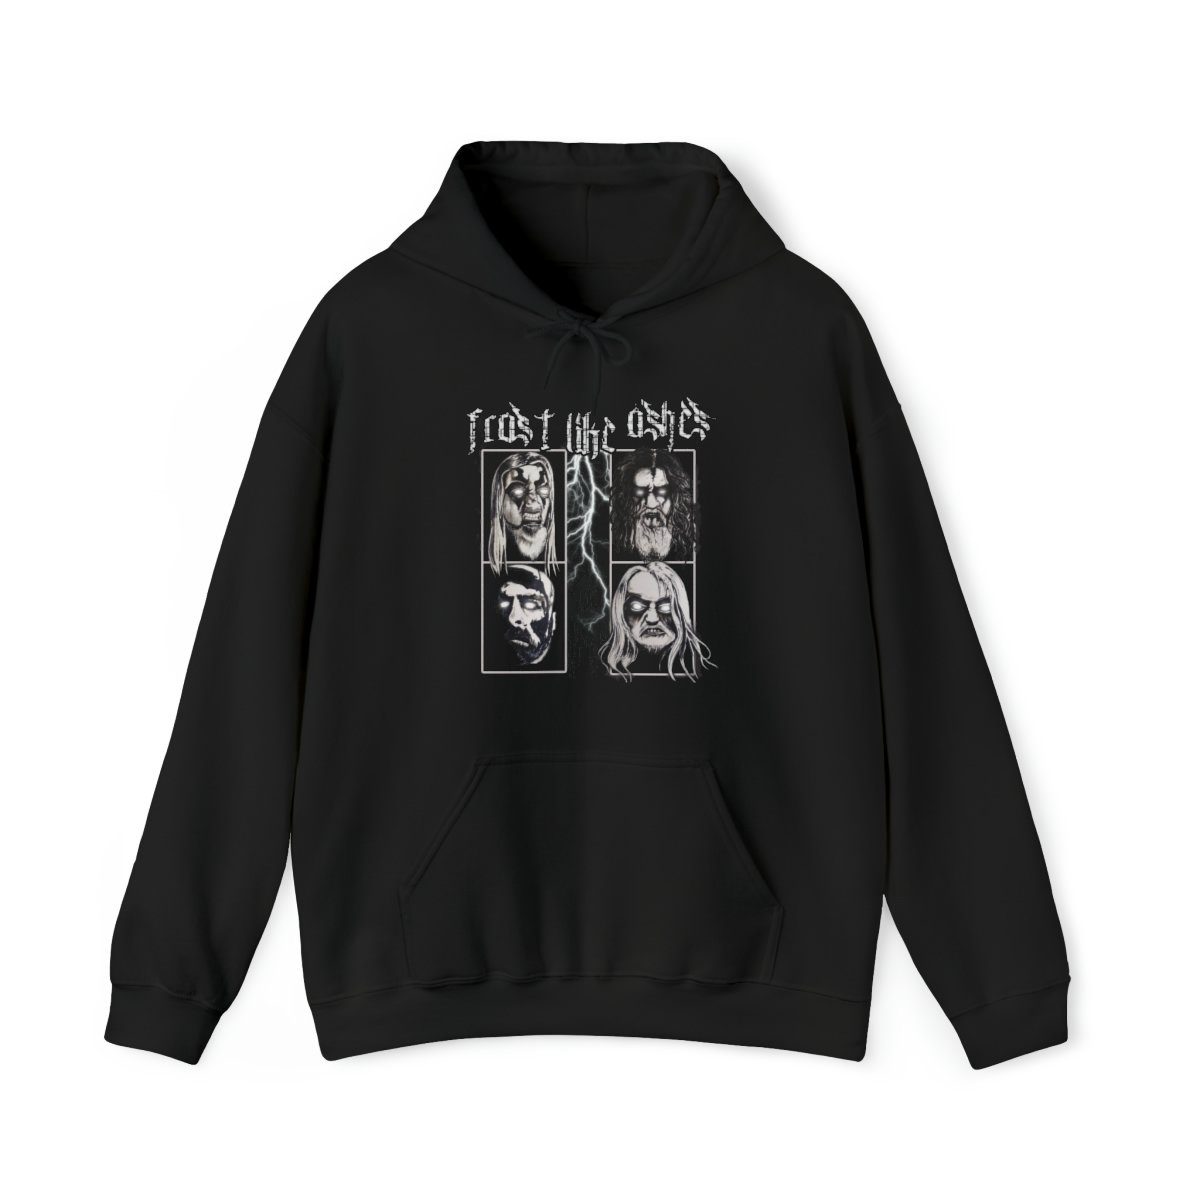 Frost Like Ashes – Lightning Pullover Hooded Sweatshirt